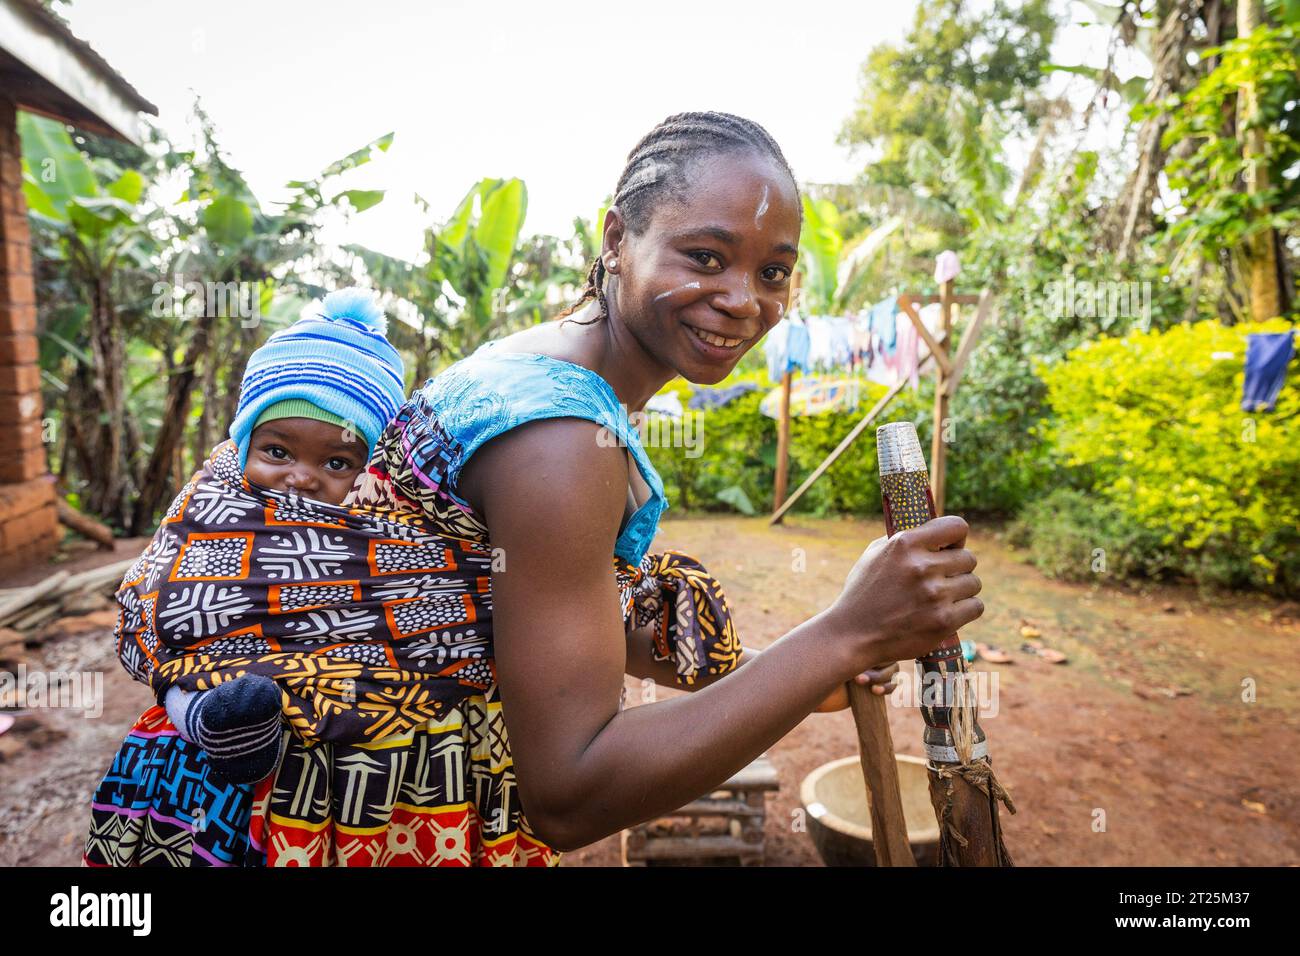 An African mother with her newborn son in the village, African tribal clothing Stock Photo